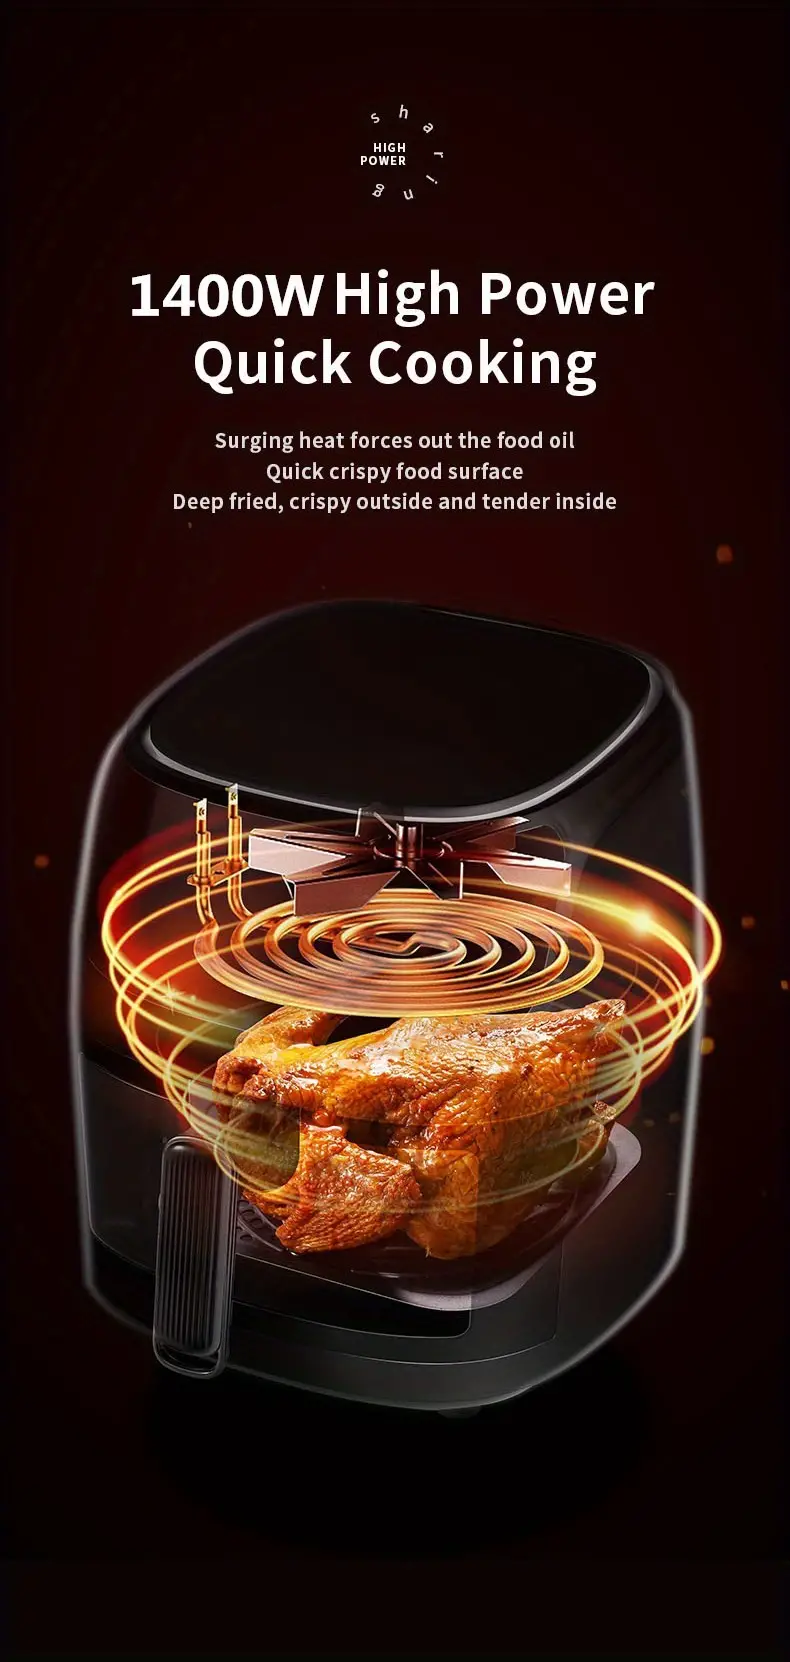 air fryer large colorful touch screen electric fryer 6l capacity working time and temperature adjustable multifunctional convenient air fryer for home details 5